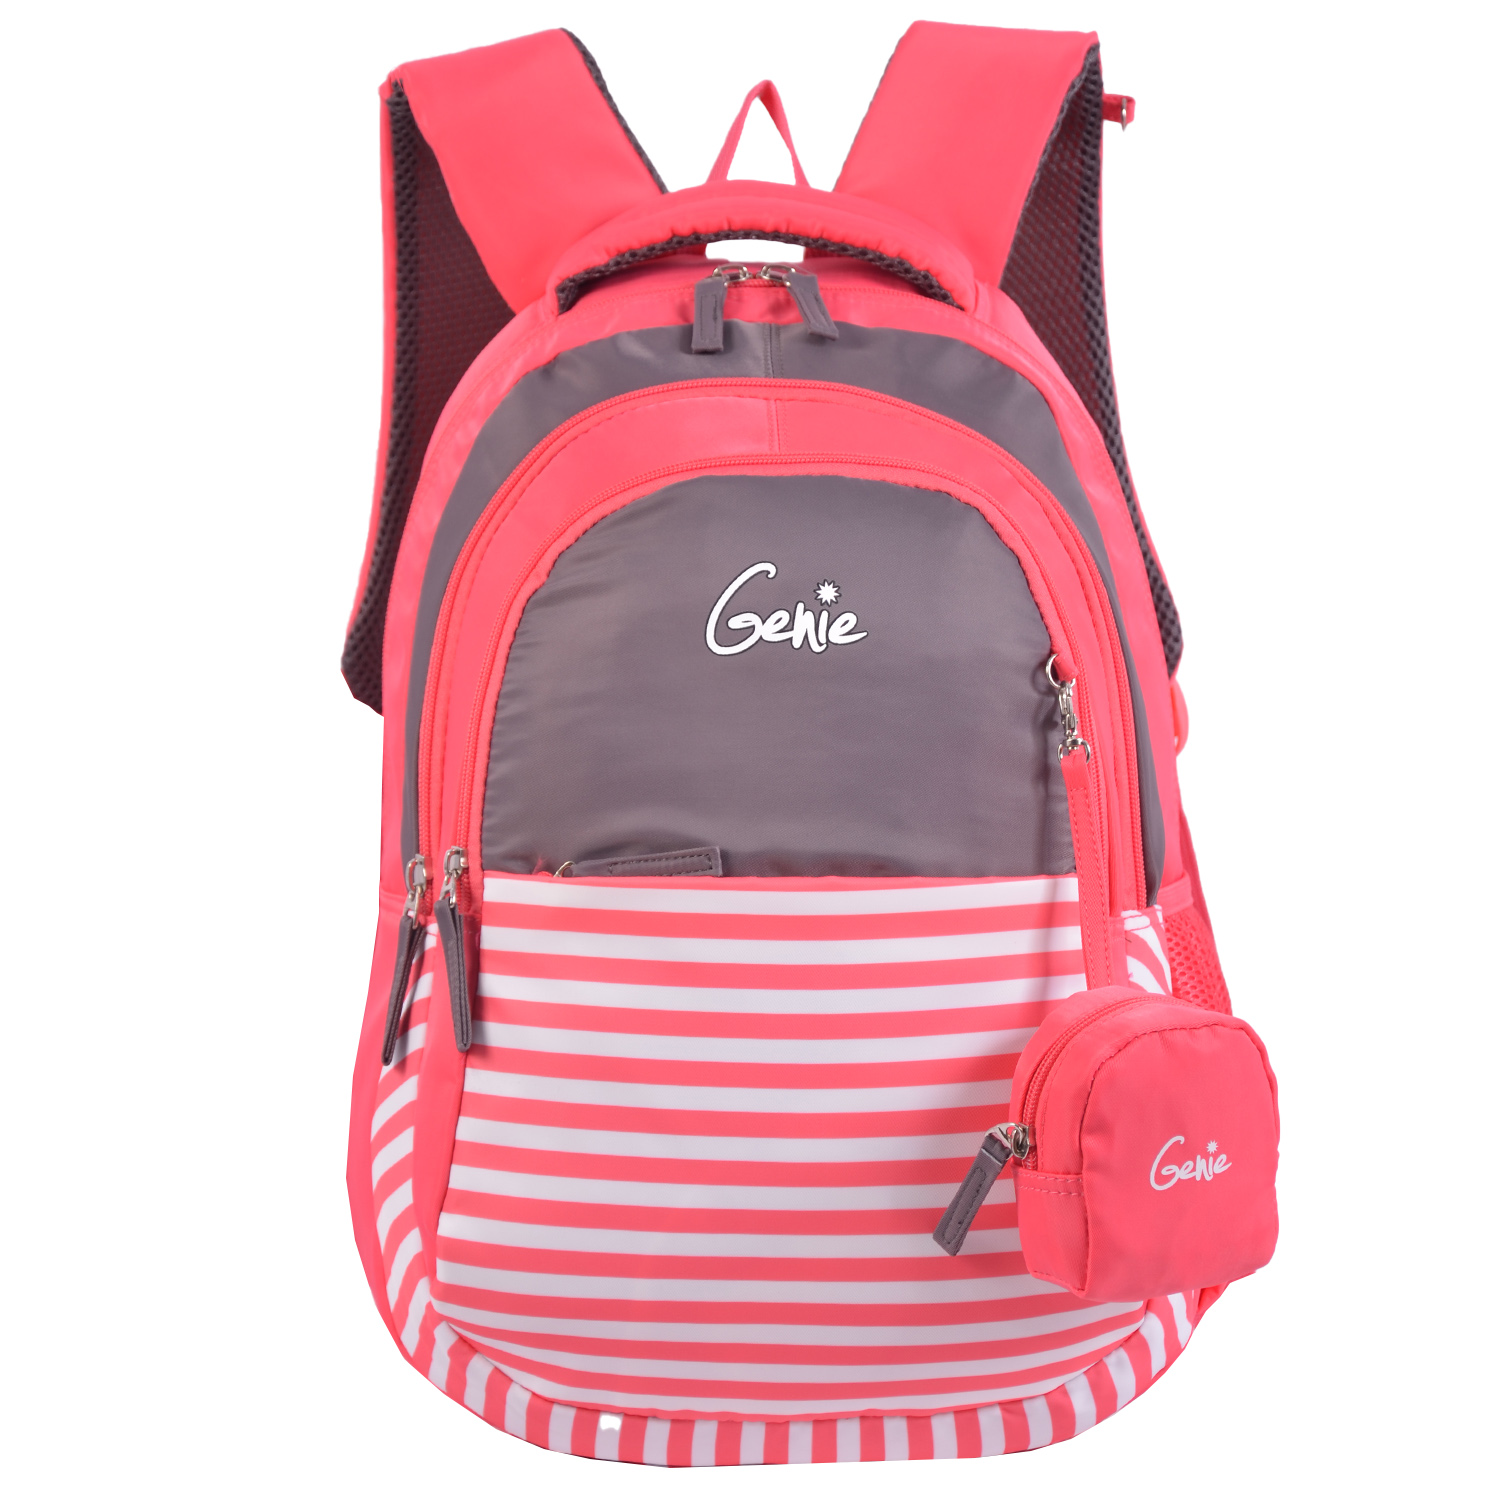 RoshanBags_GENIE 28L KIDS BACKPACK NAUTICAL PLUS 17 PINK WITH POUCH